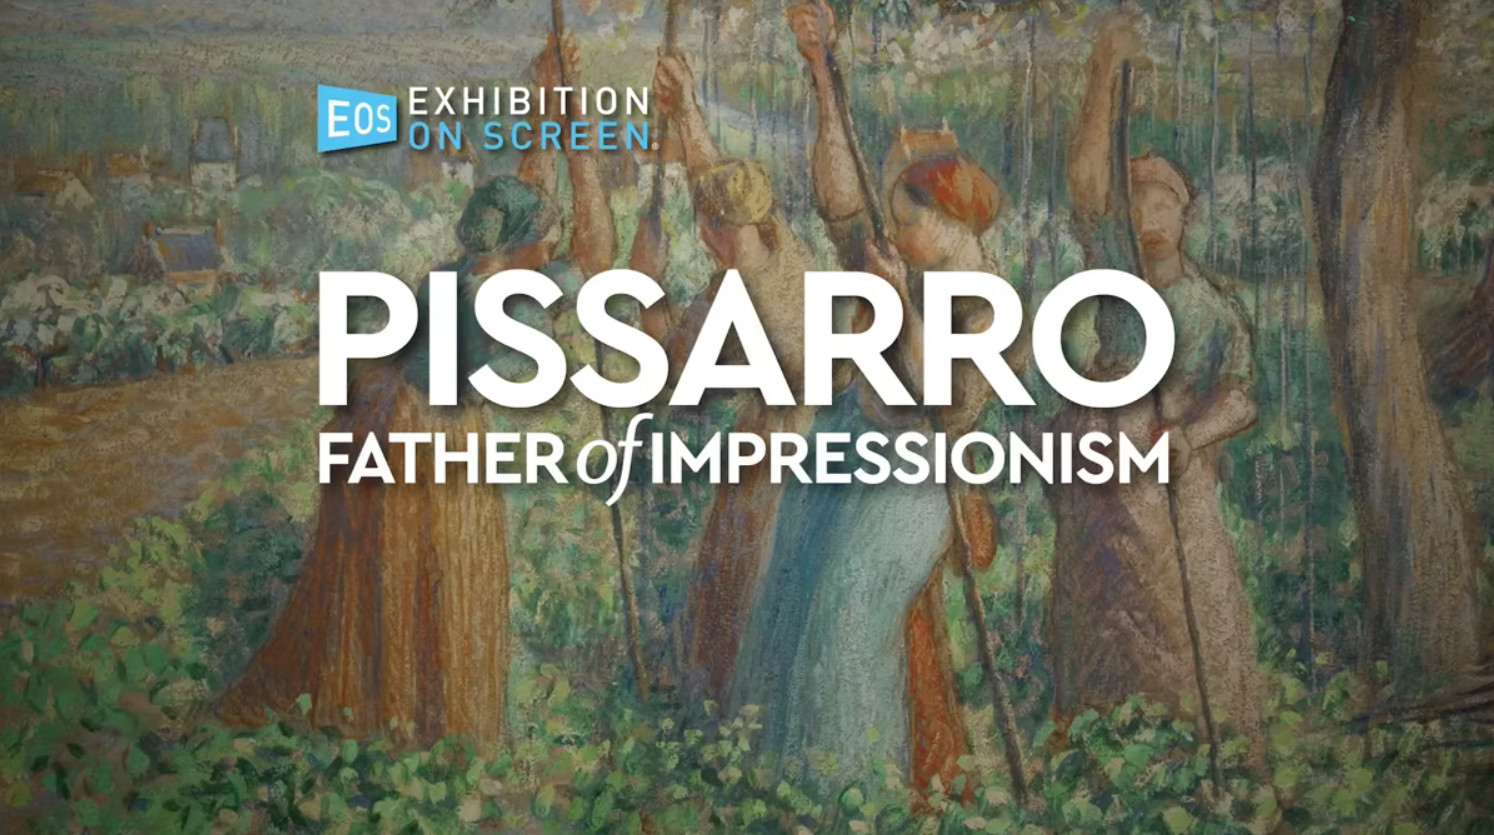 PISSARRO: FATHER OF IMPRESSIONISM In cinemas nationwide from 24 May 2022